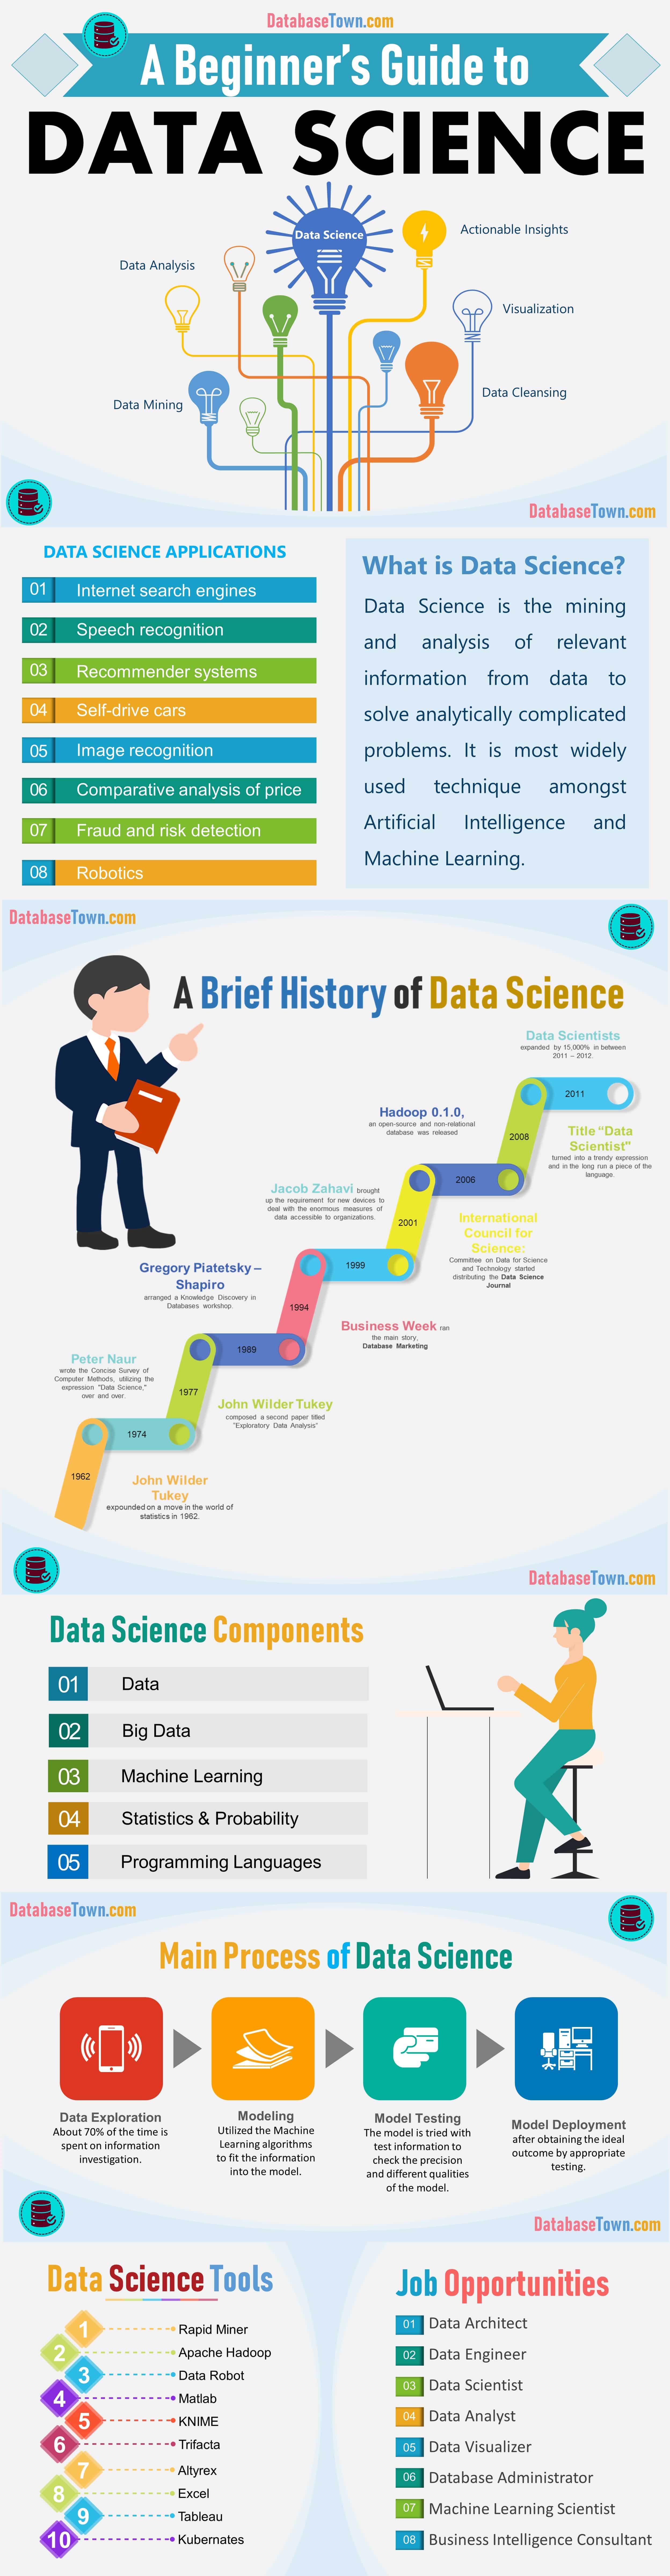 Introduction to Data Science| A Beginner's Guide (infographic)